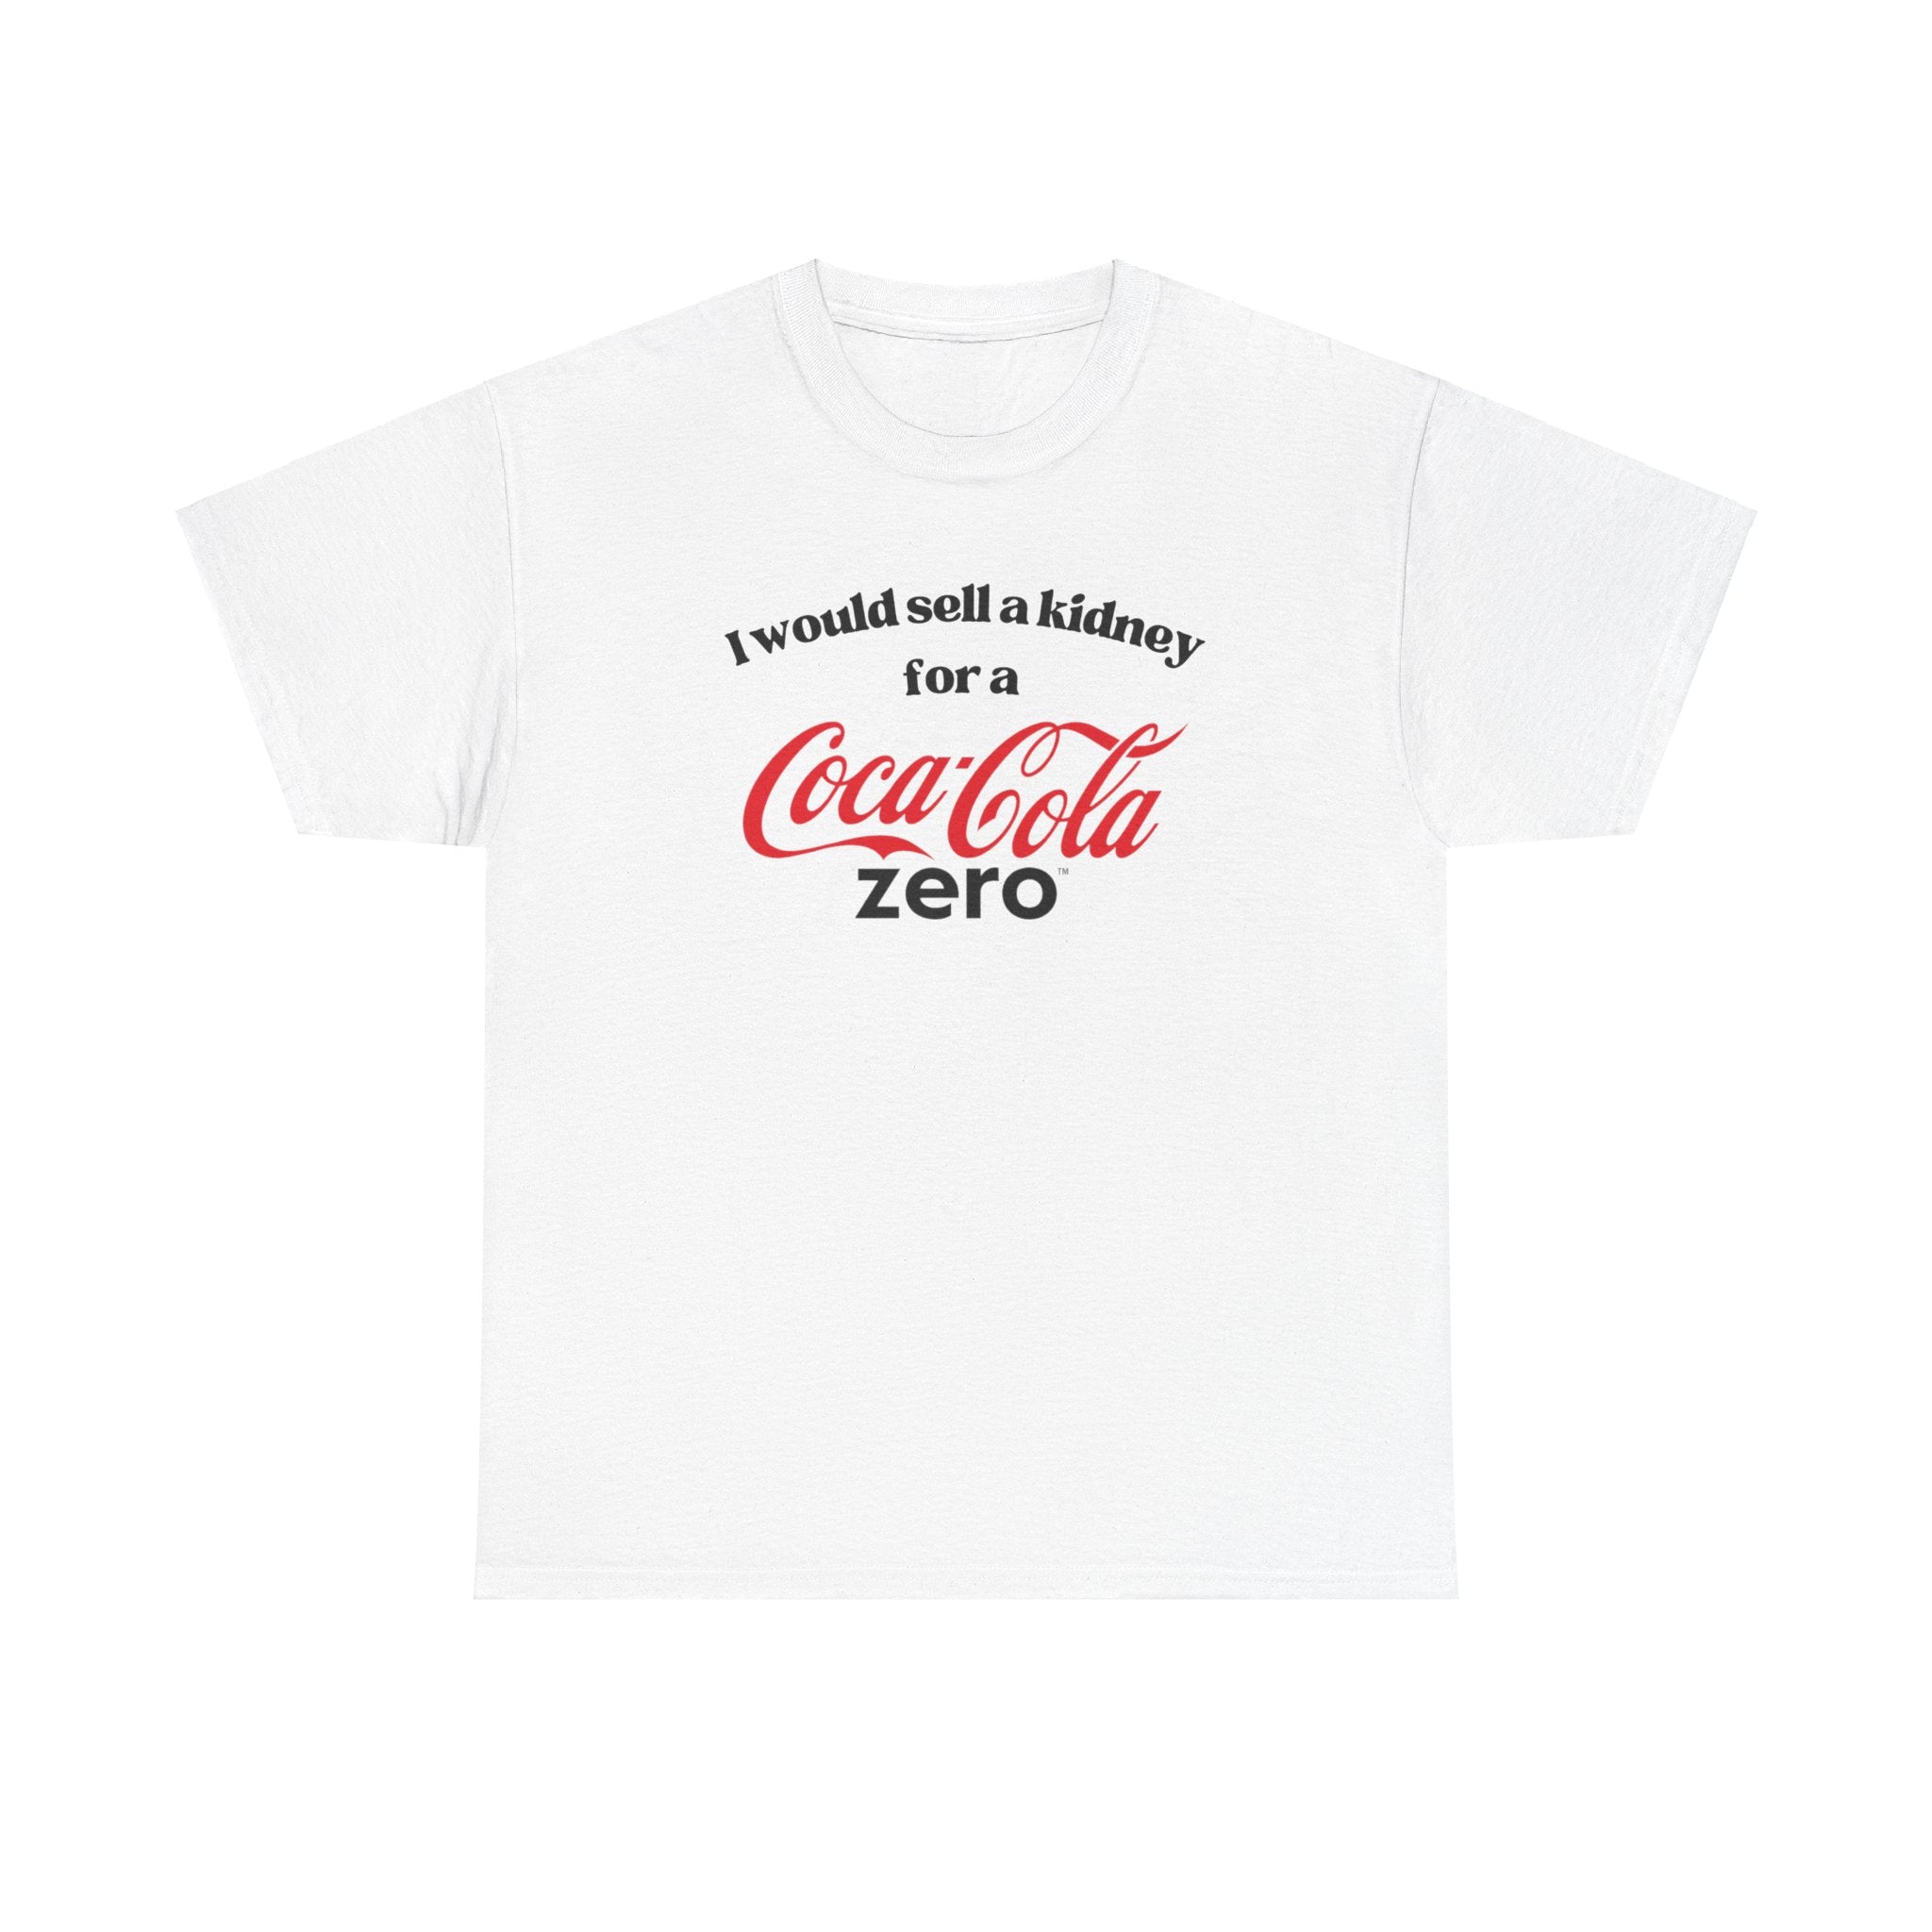 I Would Sell a Kidney for a Coke Zero